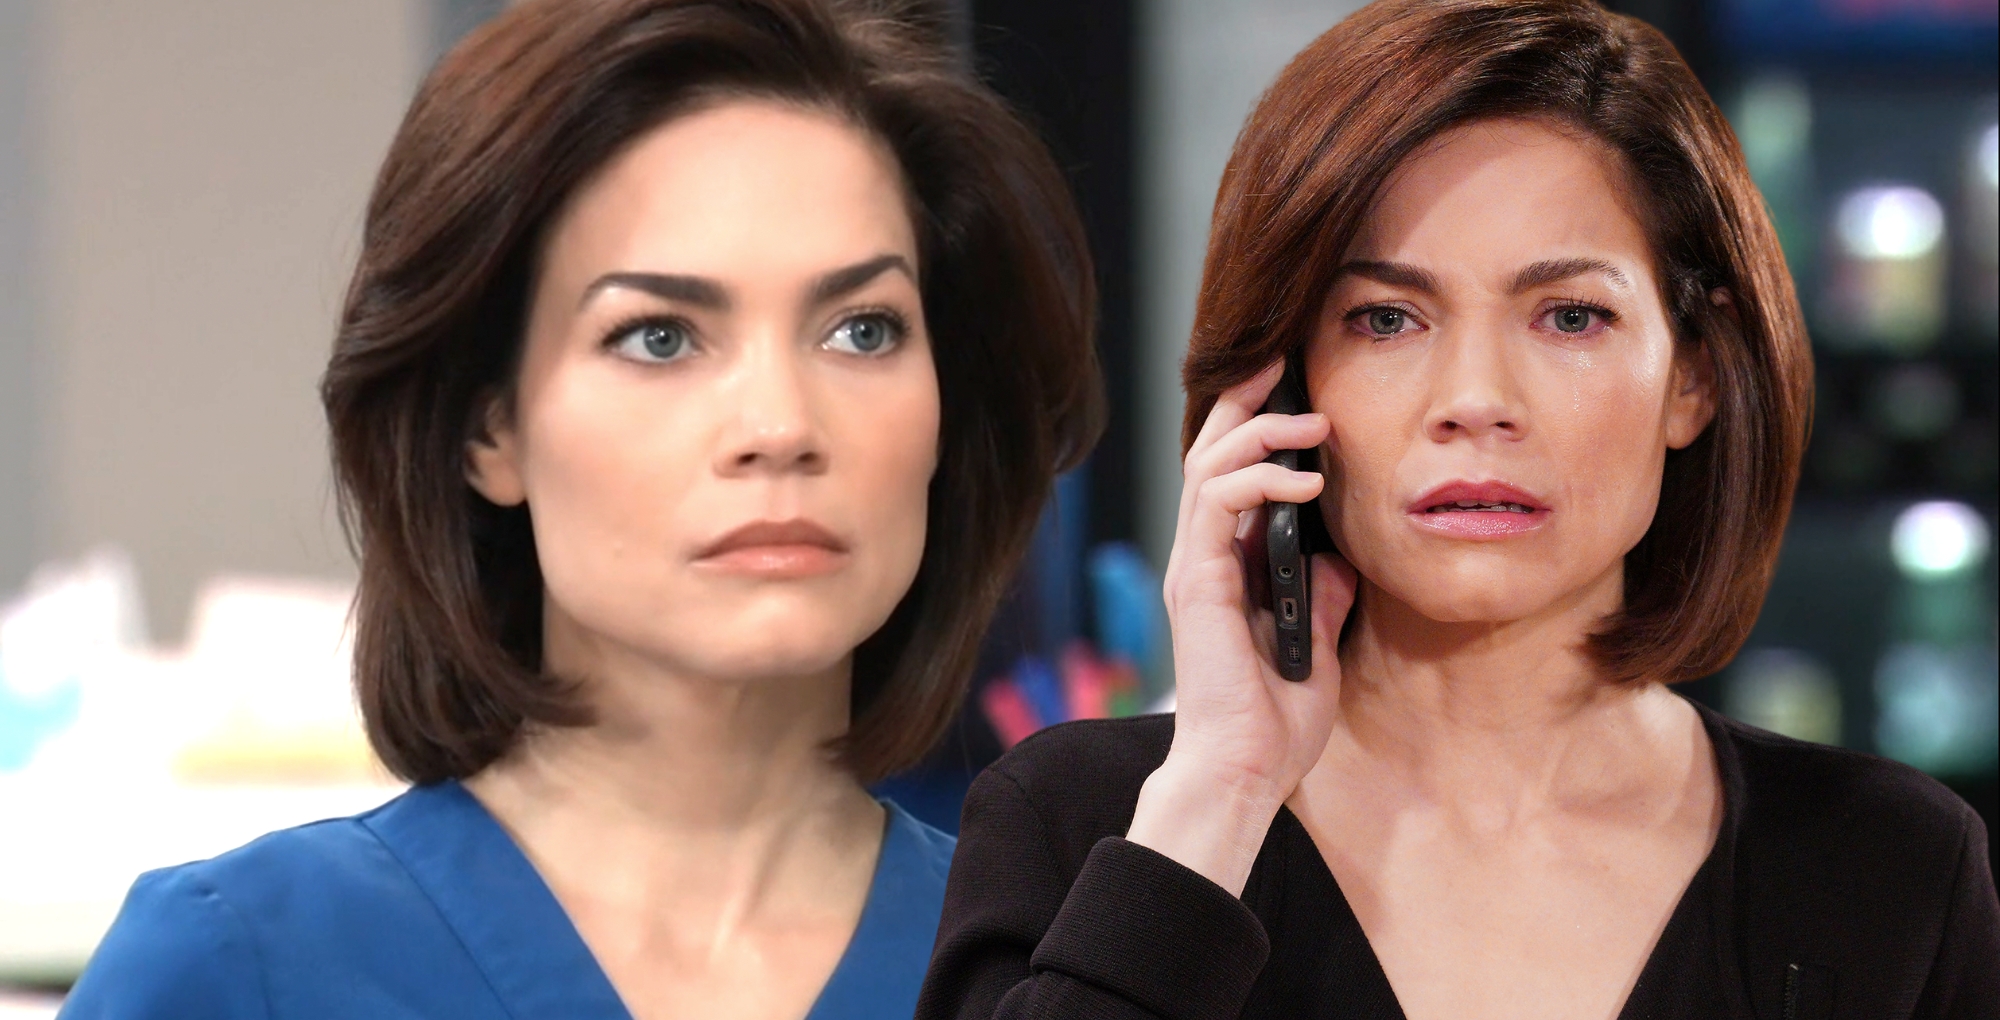 liz webber is the perfect choice for general hospital head nurse, two images